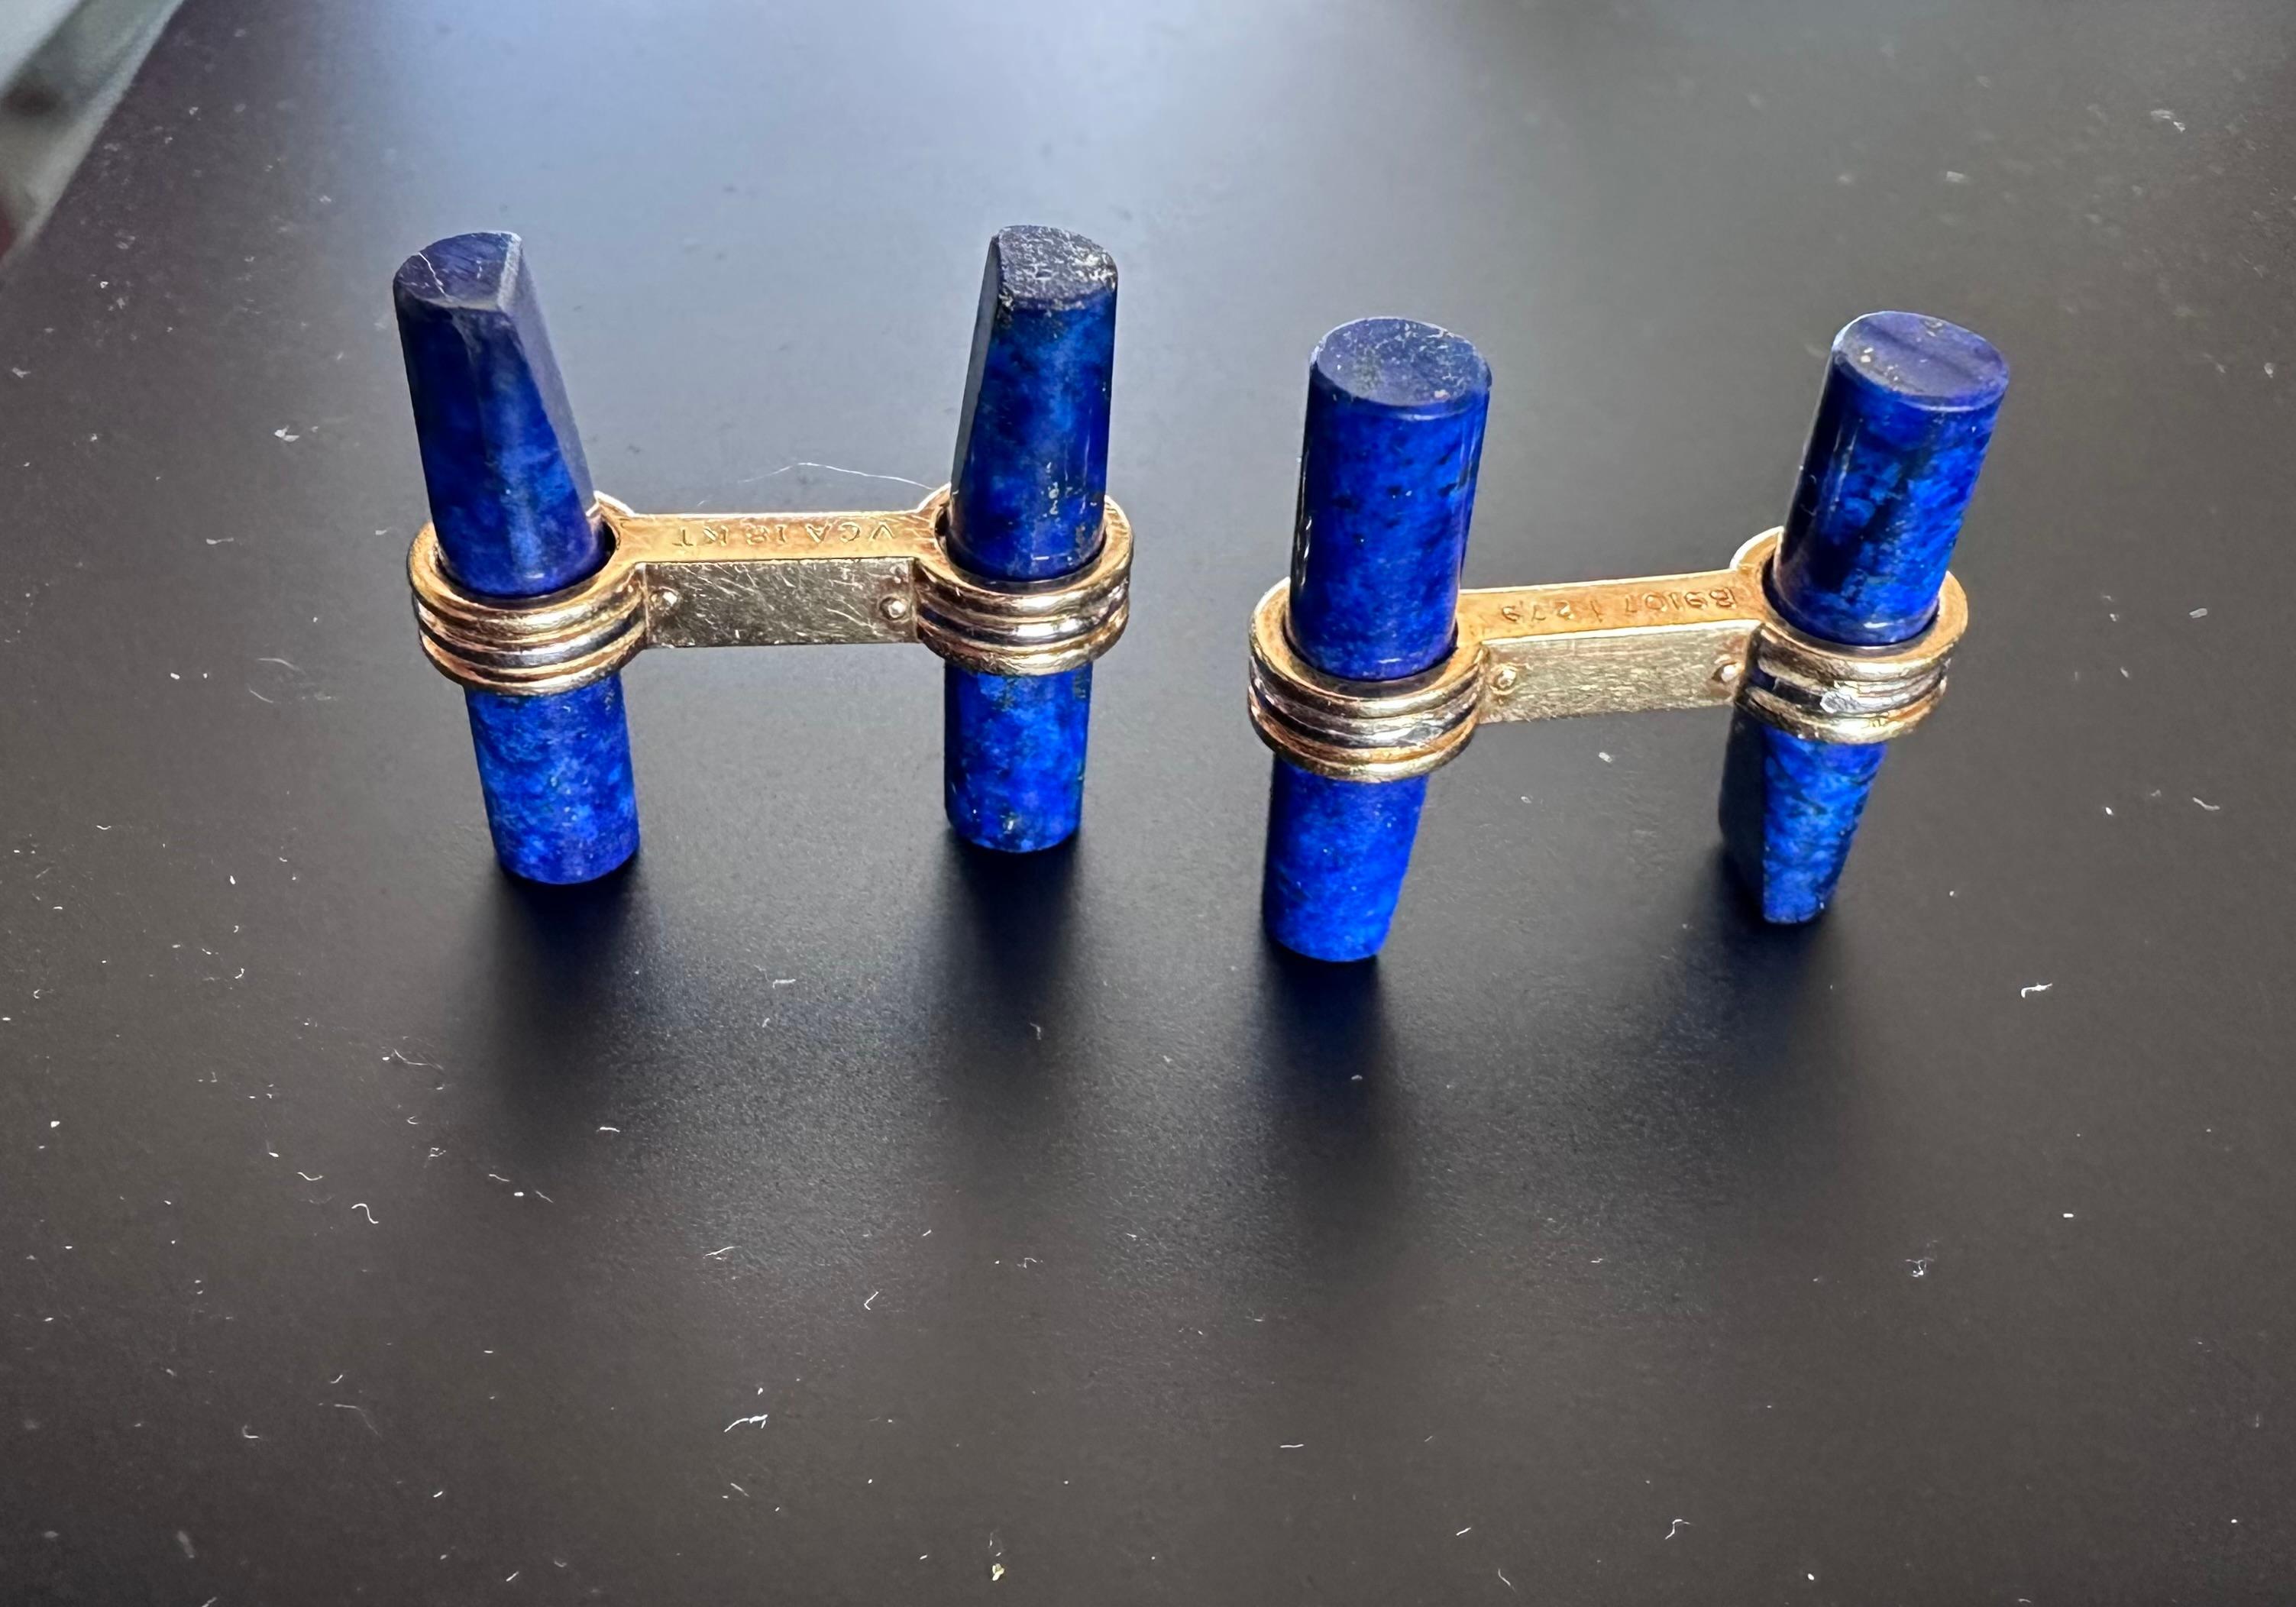 Van Cleef & Arpels Cufflinks
18k Yellow Gold
4 polished Lapis Lazuli cylinder separated by a gold post. Easily removable post and easily threaded through the shirt cuff.
11 Grams
1 inch by .75 inches
Hallmarks and Numbers
